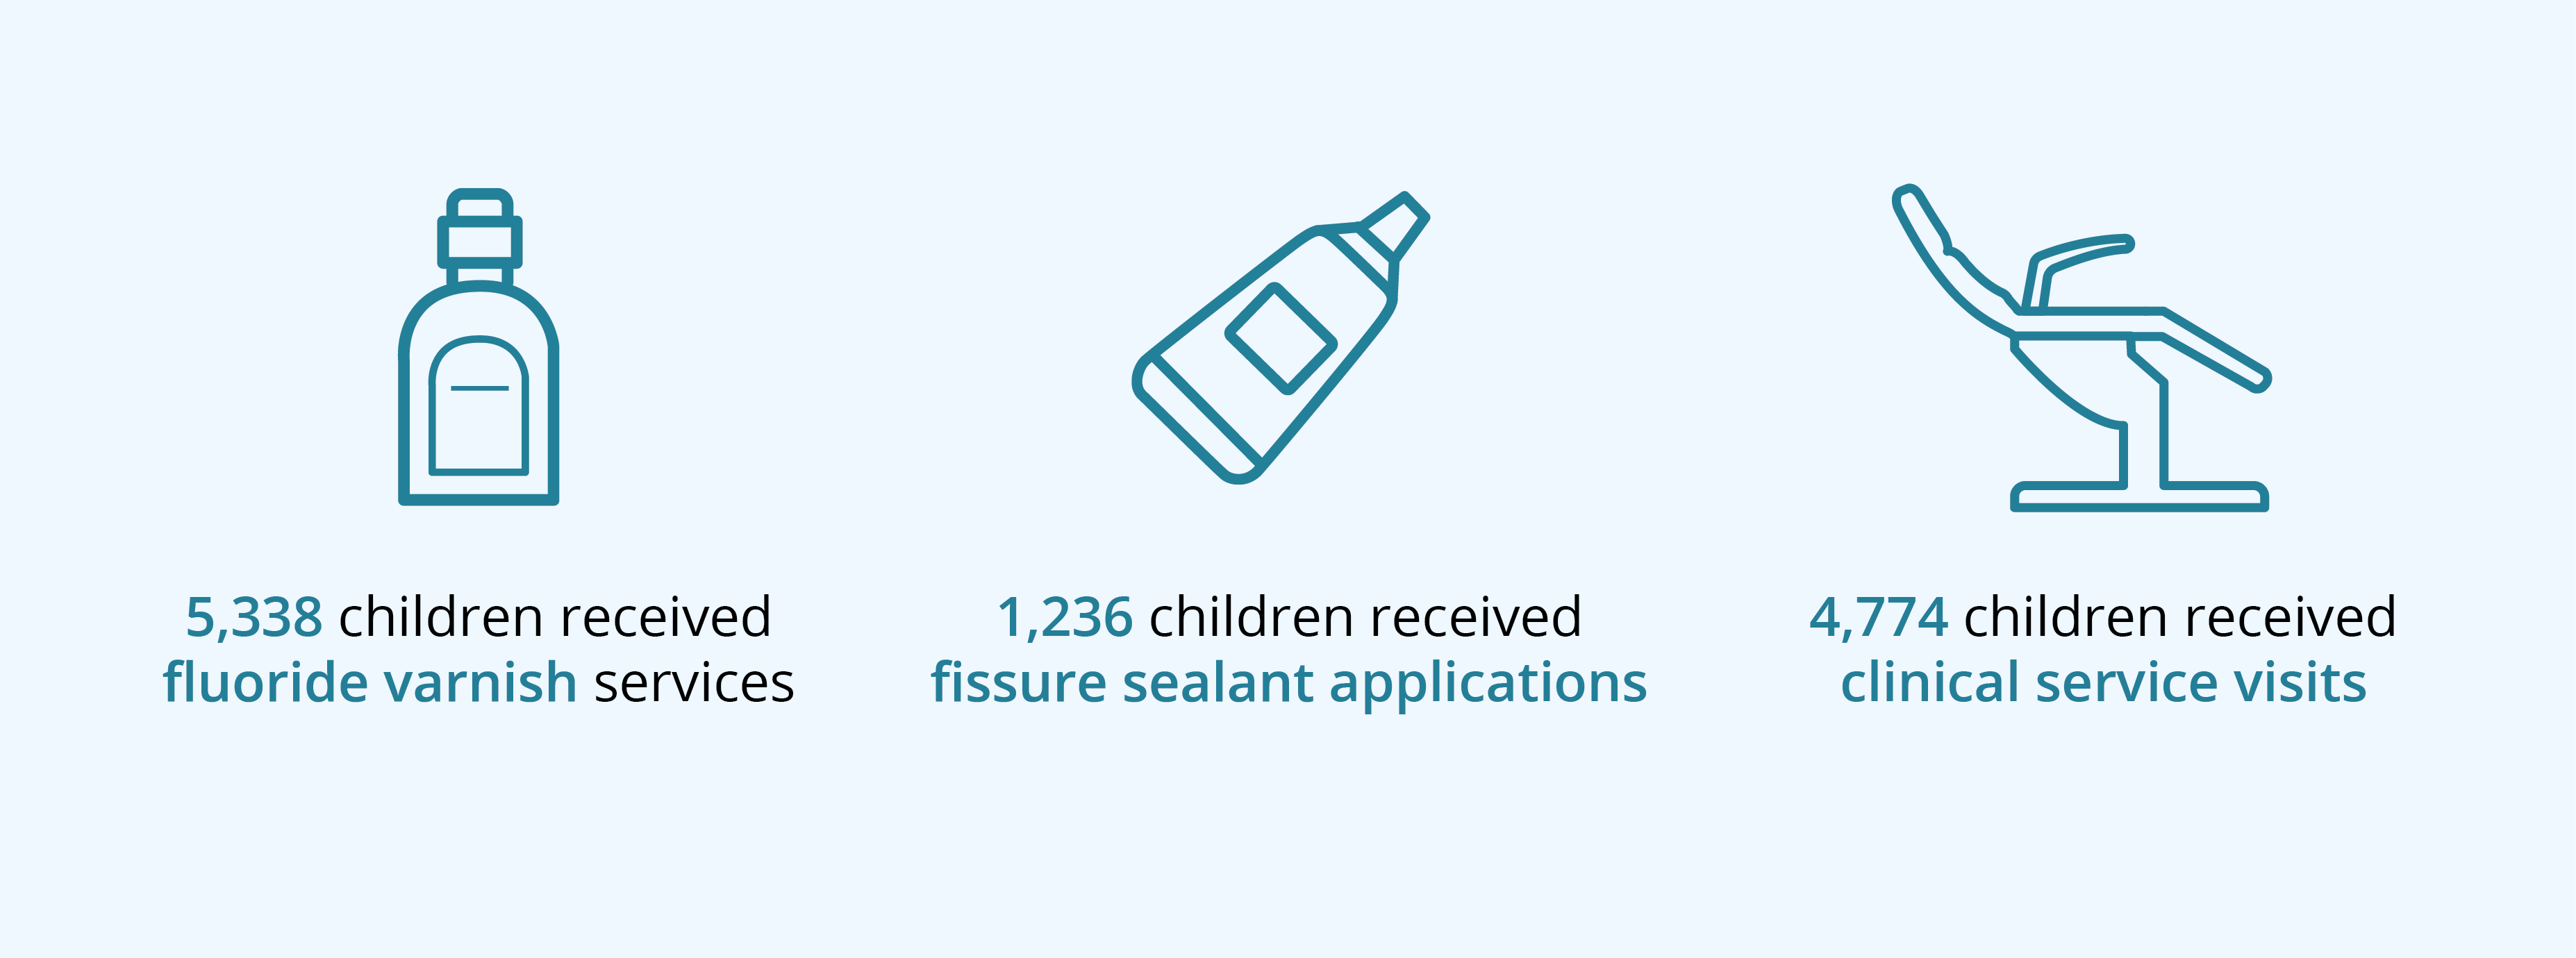 The infographic shows that in 2022, in the NTRAI OHP, 5,338 chilren received fluoride varnish services; 1,236 children received fissure sealant services; and 4,774 children received clinical service visits. 